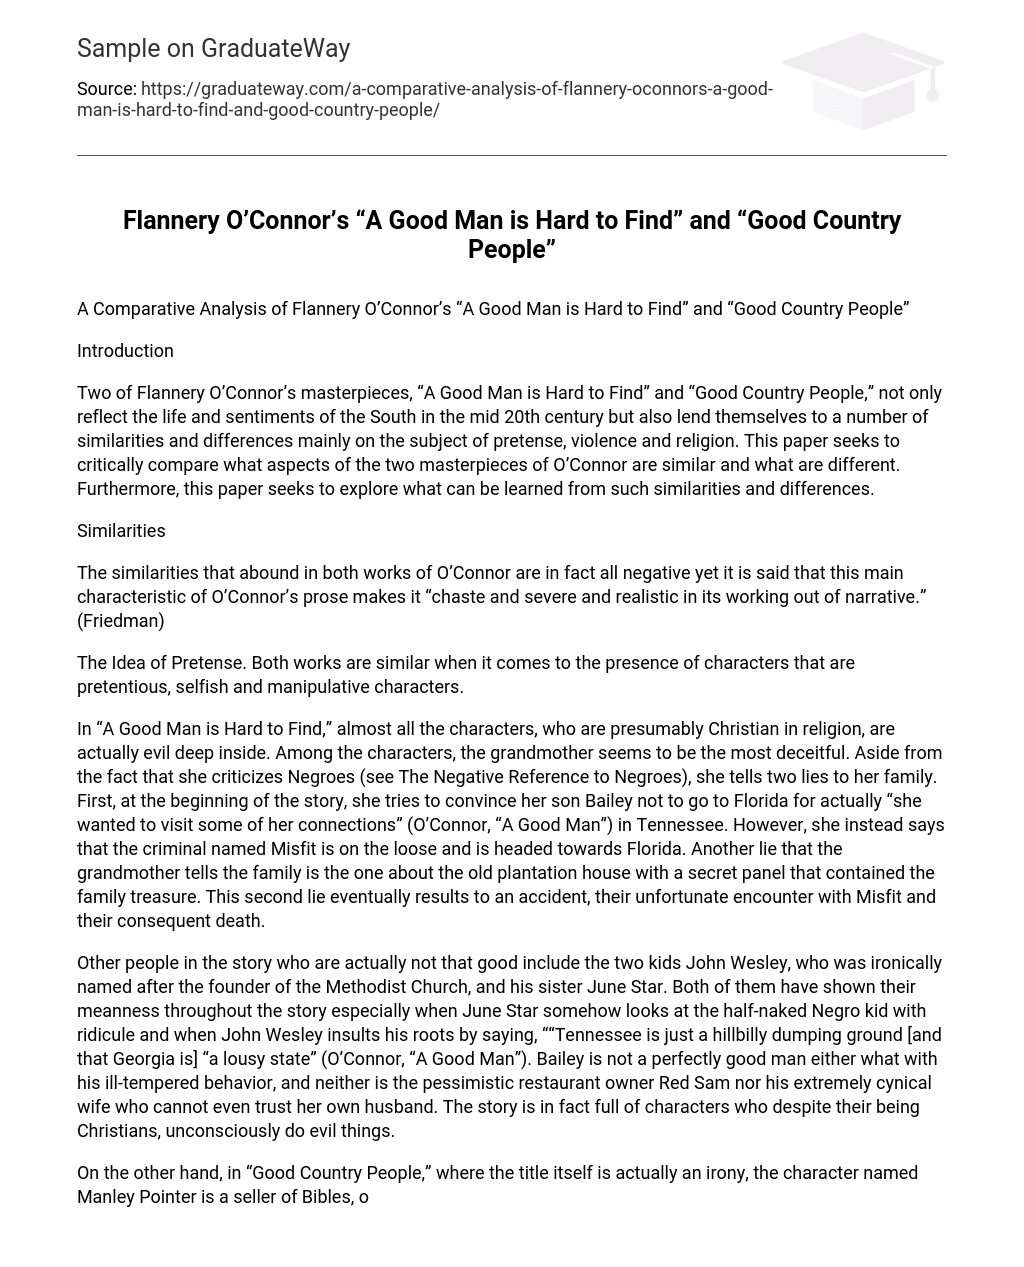 Flannery O’Connor’s “A Good Man is Hard to Find” and “Good Country People”